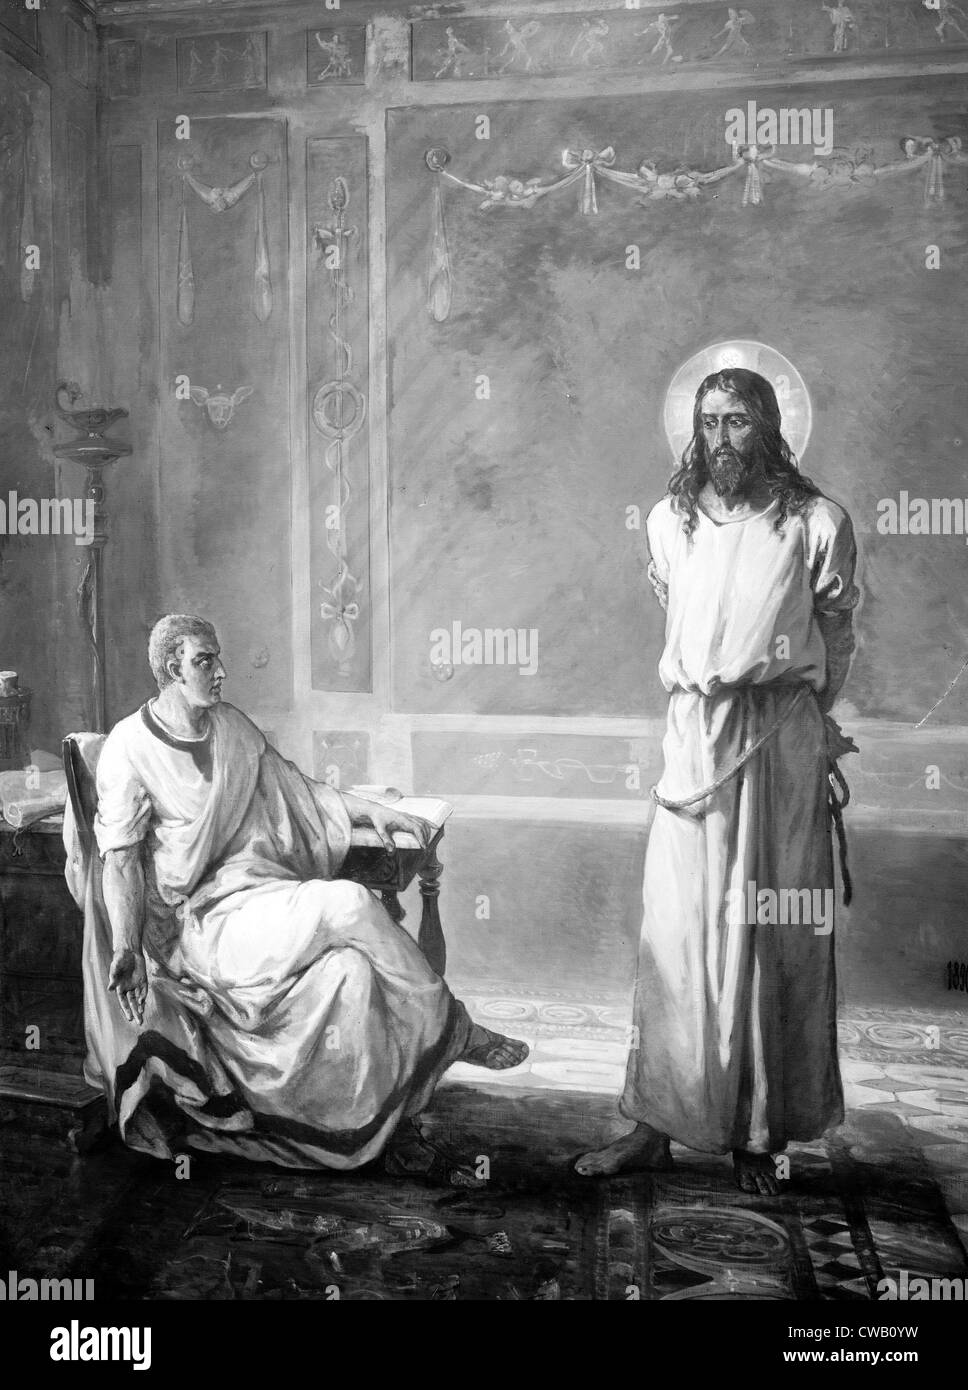 Jesus Christ, title: Jesus Christ tried by Pilate, from Christ's Passion set of paintings by Kosheleff, circa early 1900s. Stock Photo